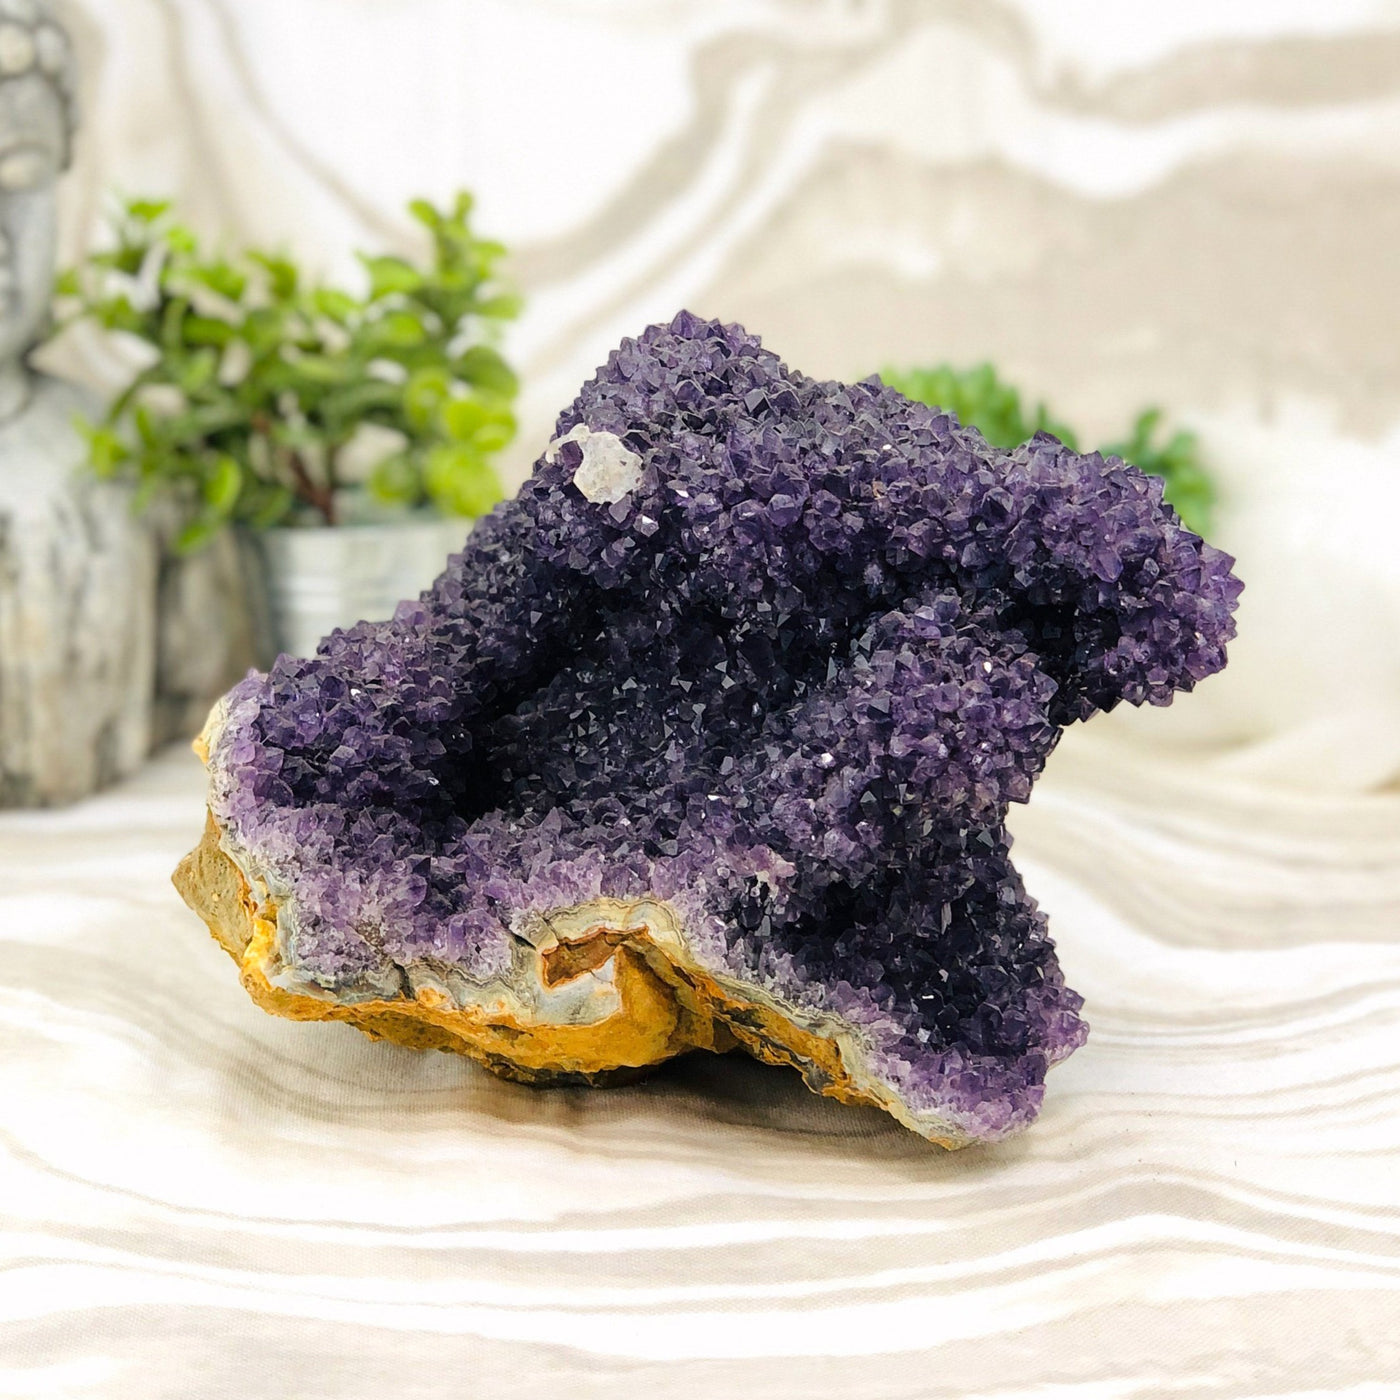 Amethyst Cluster Stalactite with decorations in the background